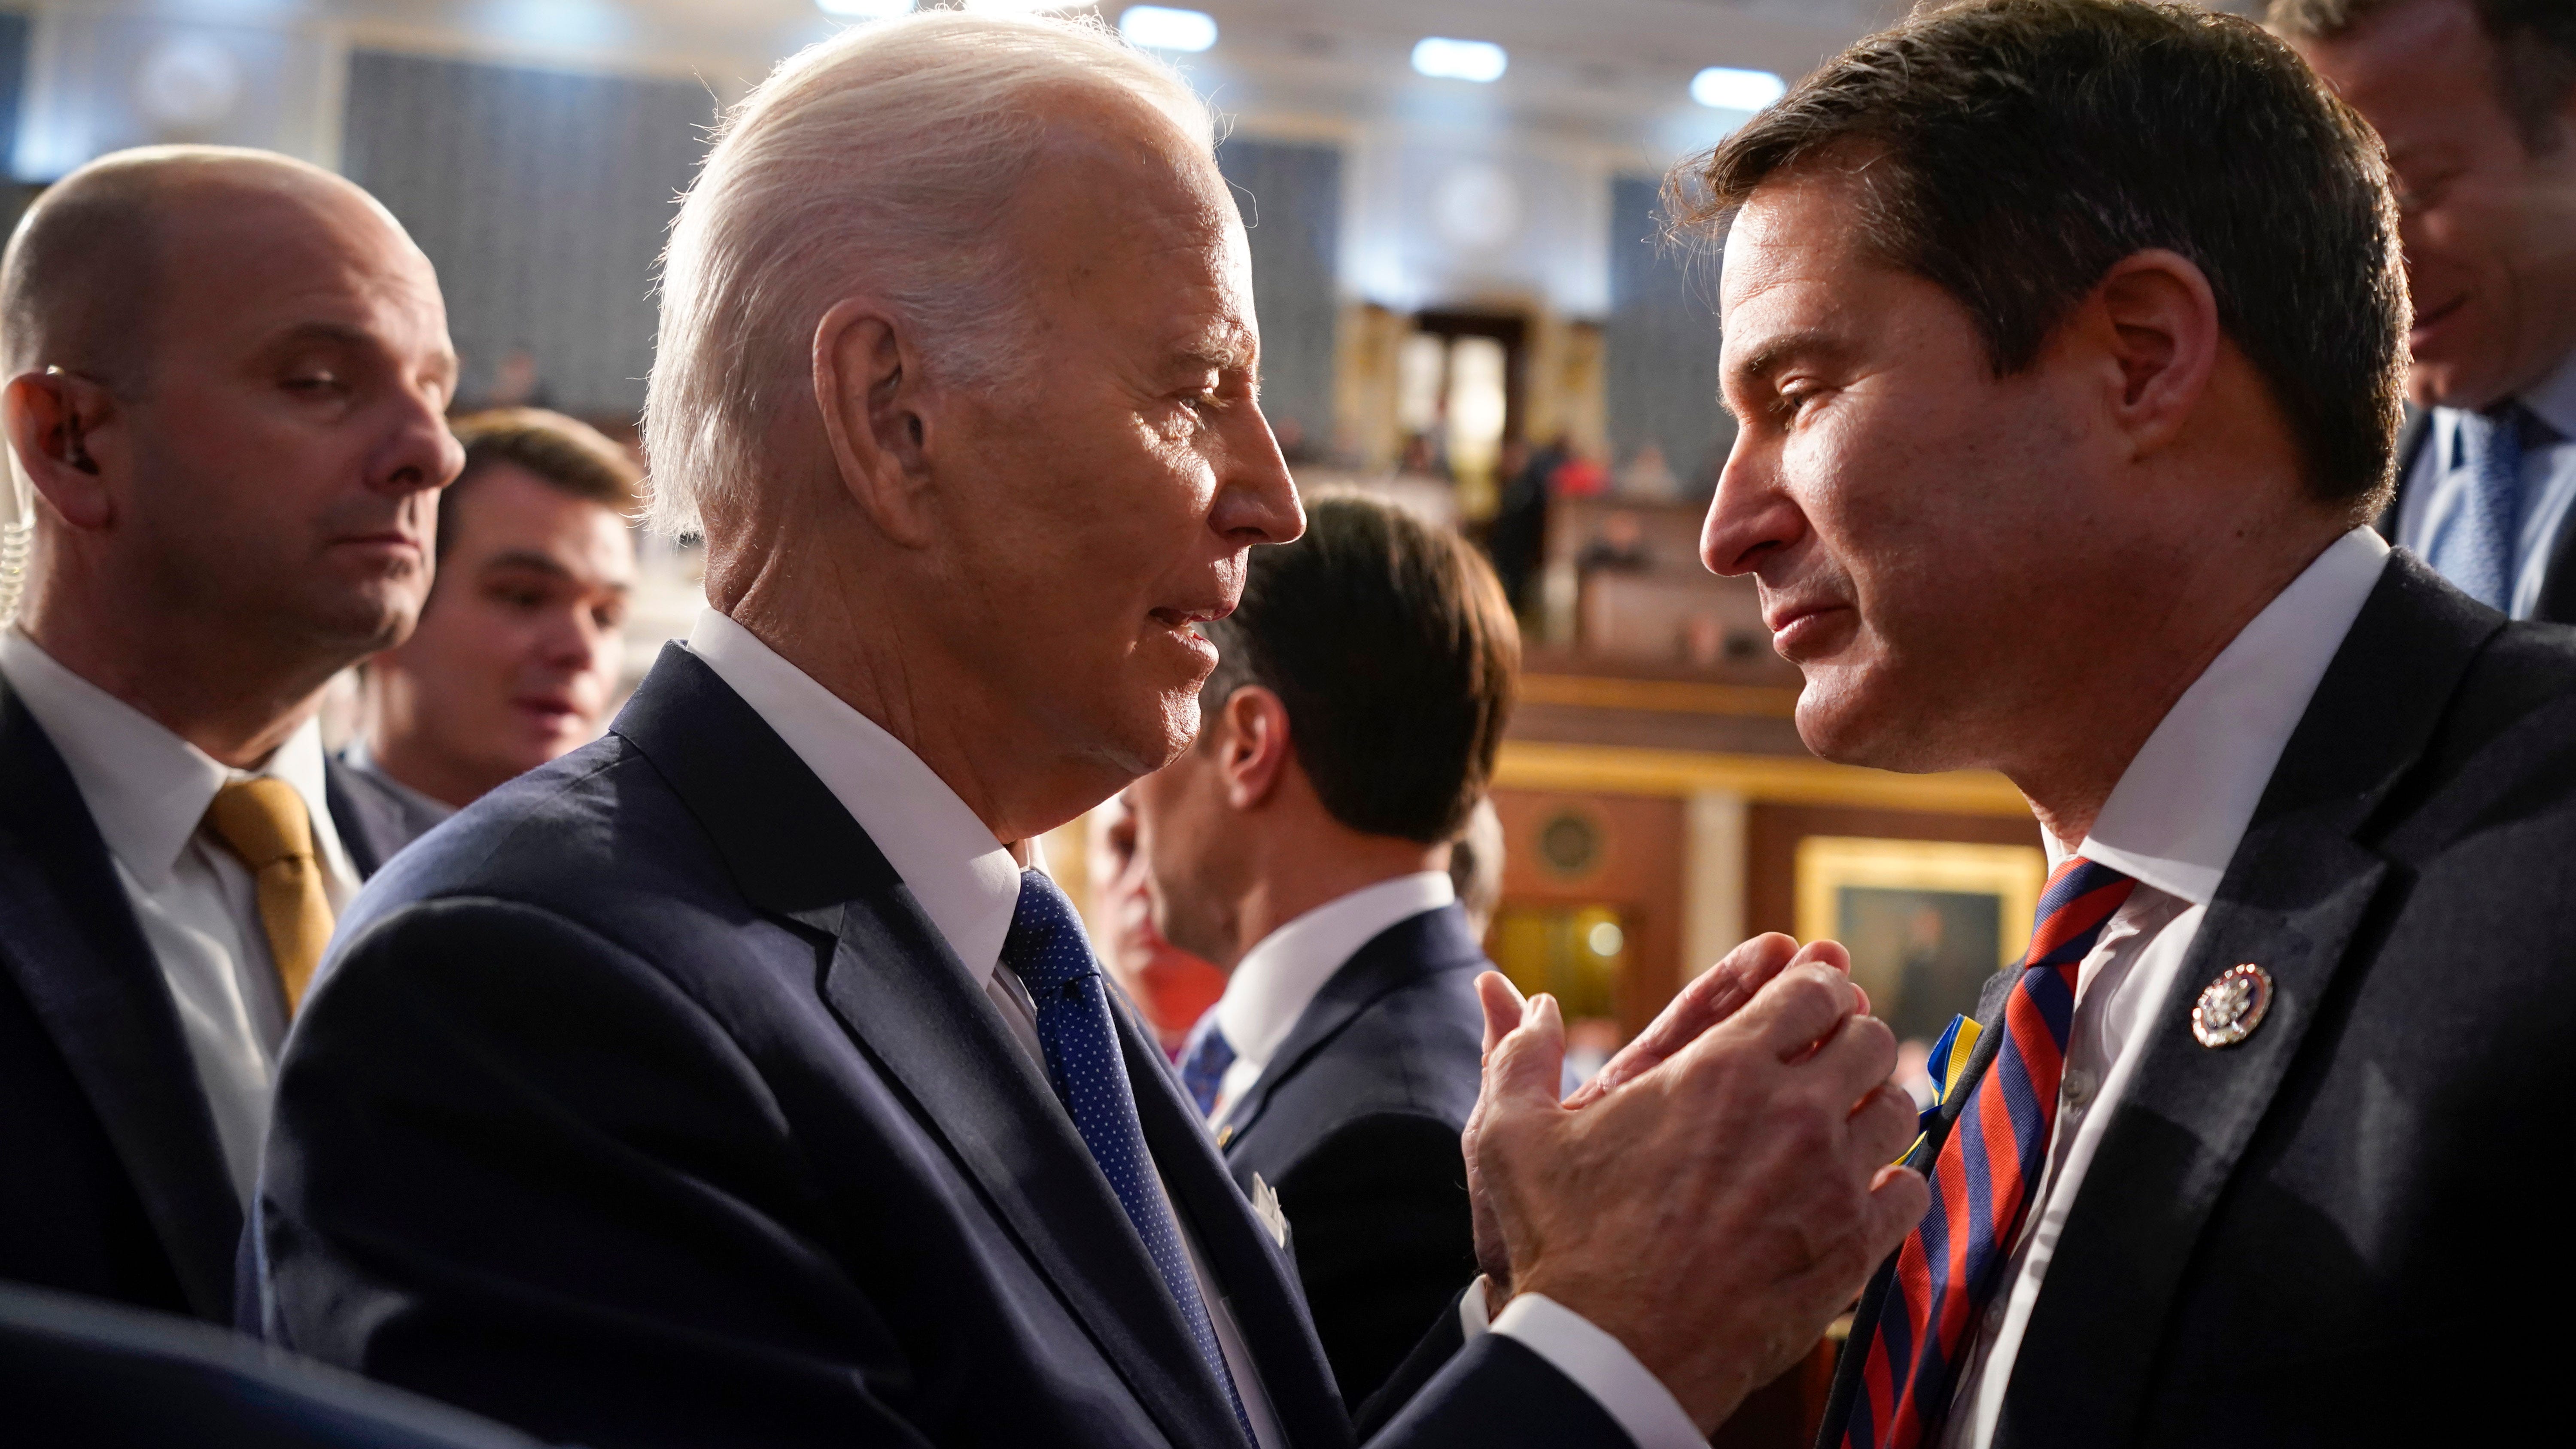 5 House Democrats called for Biden to step aside. What we know.